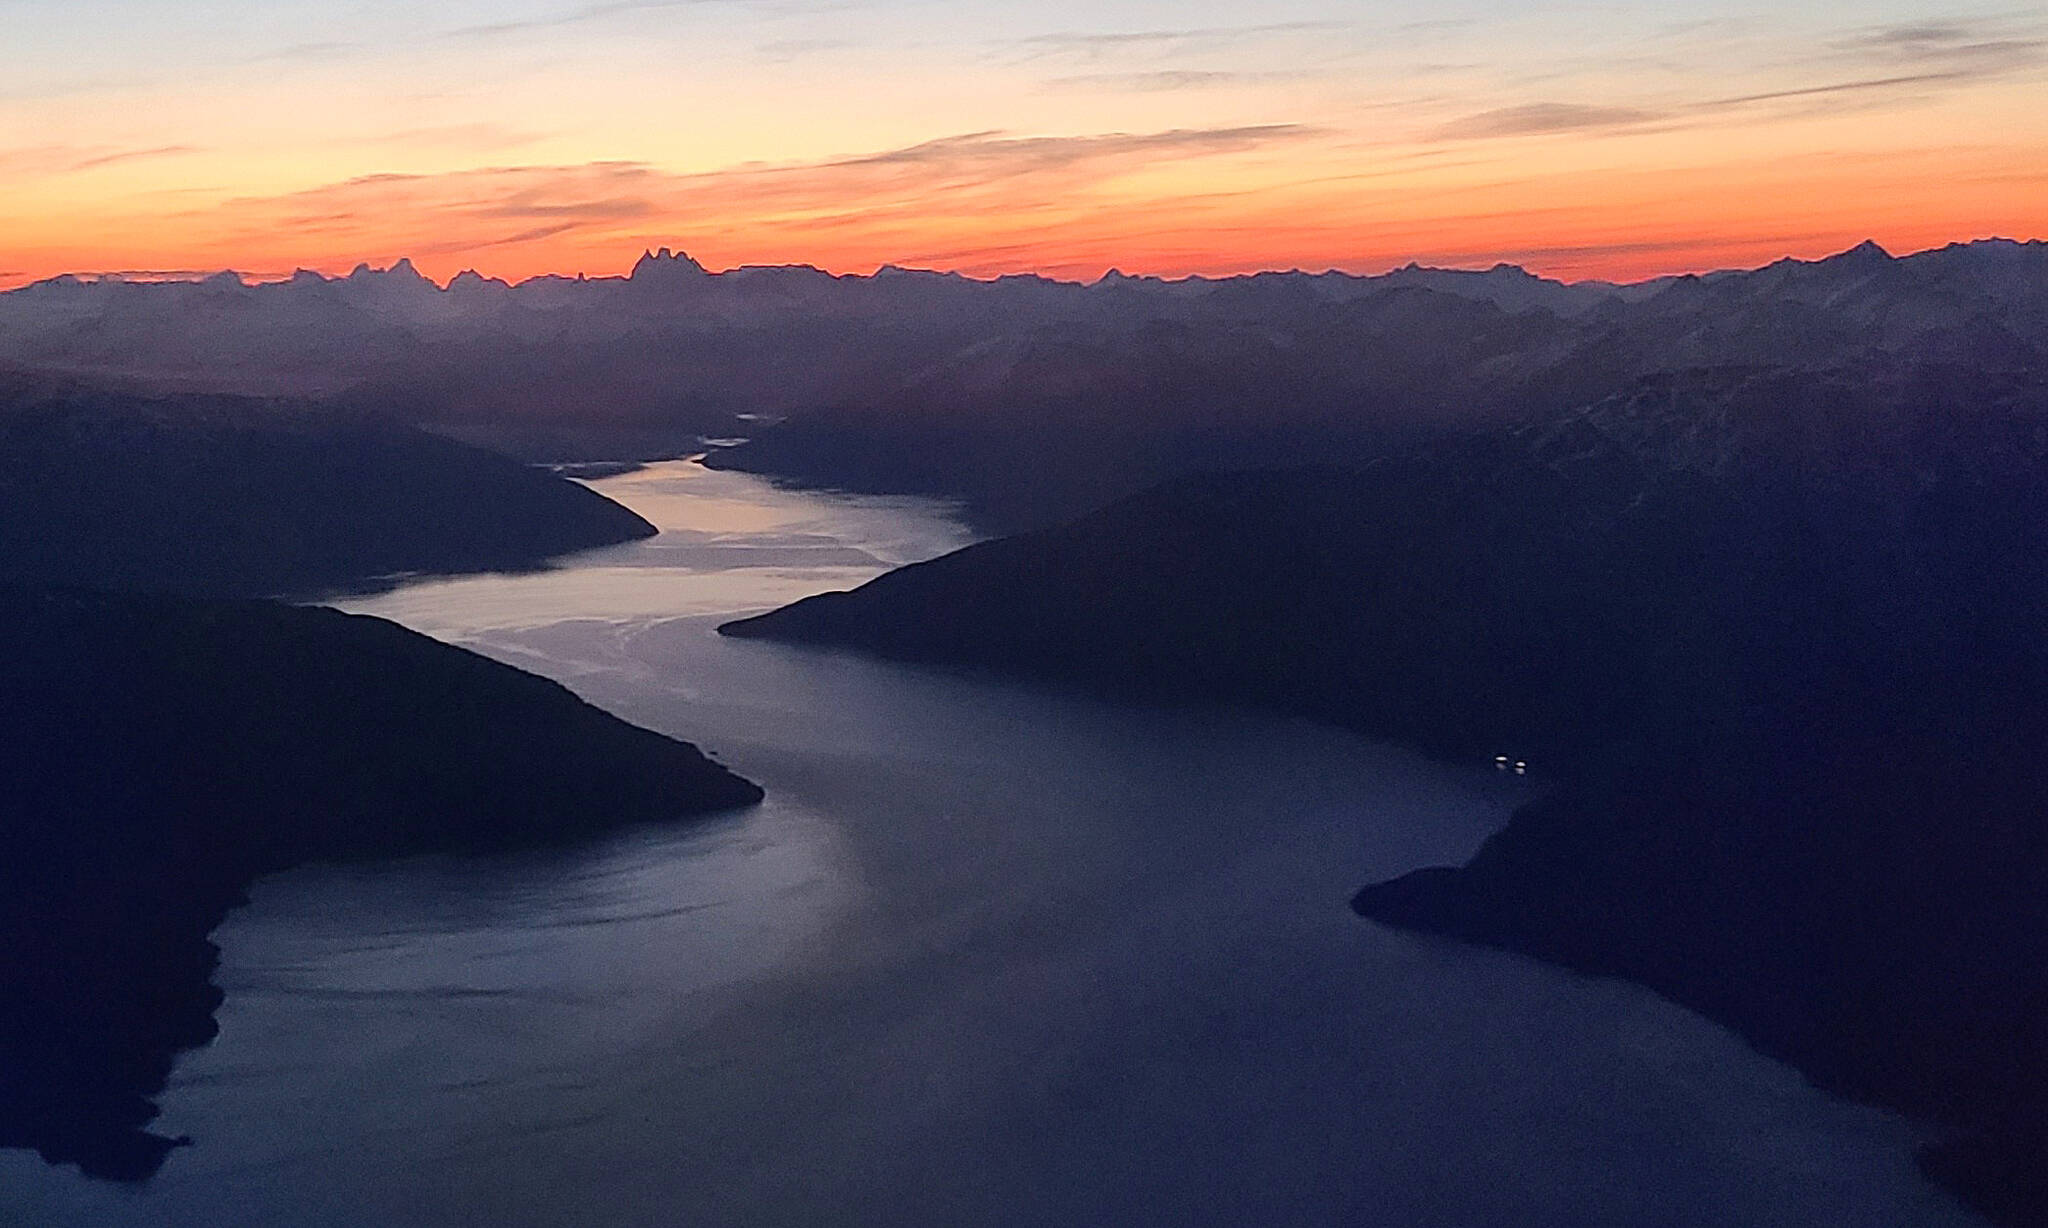 Taku Inlet during early dawn twilight at 2:01 a.m. June 20. (Photo by Randy Burton)